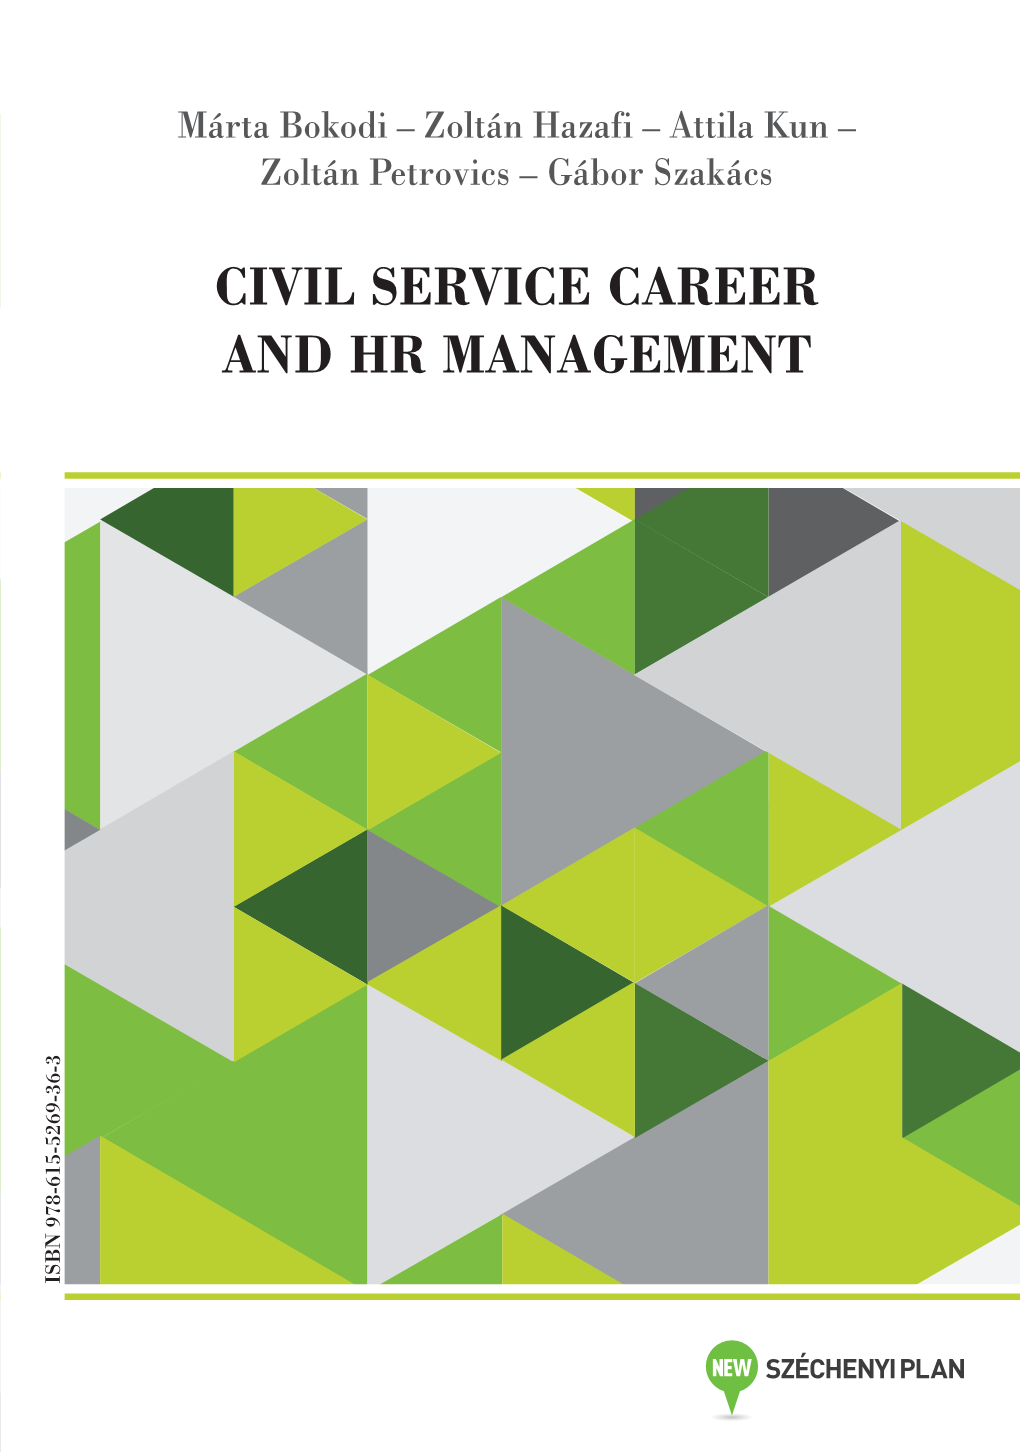 CIVIL SERVICE CAREER and HR MANAGEMENT ISBN 978-615-5269-36-3 Ministry of Public Administration and Justice